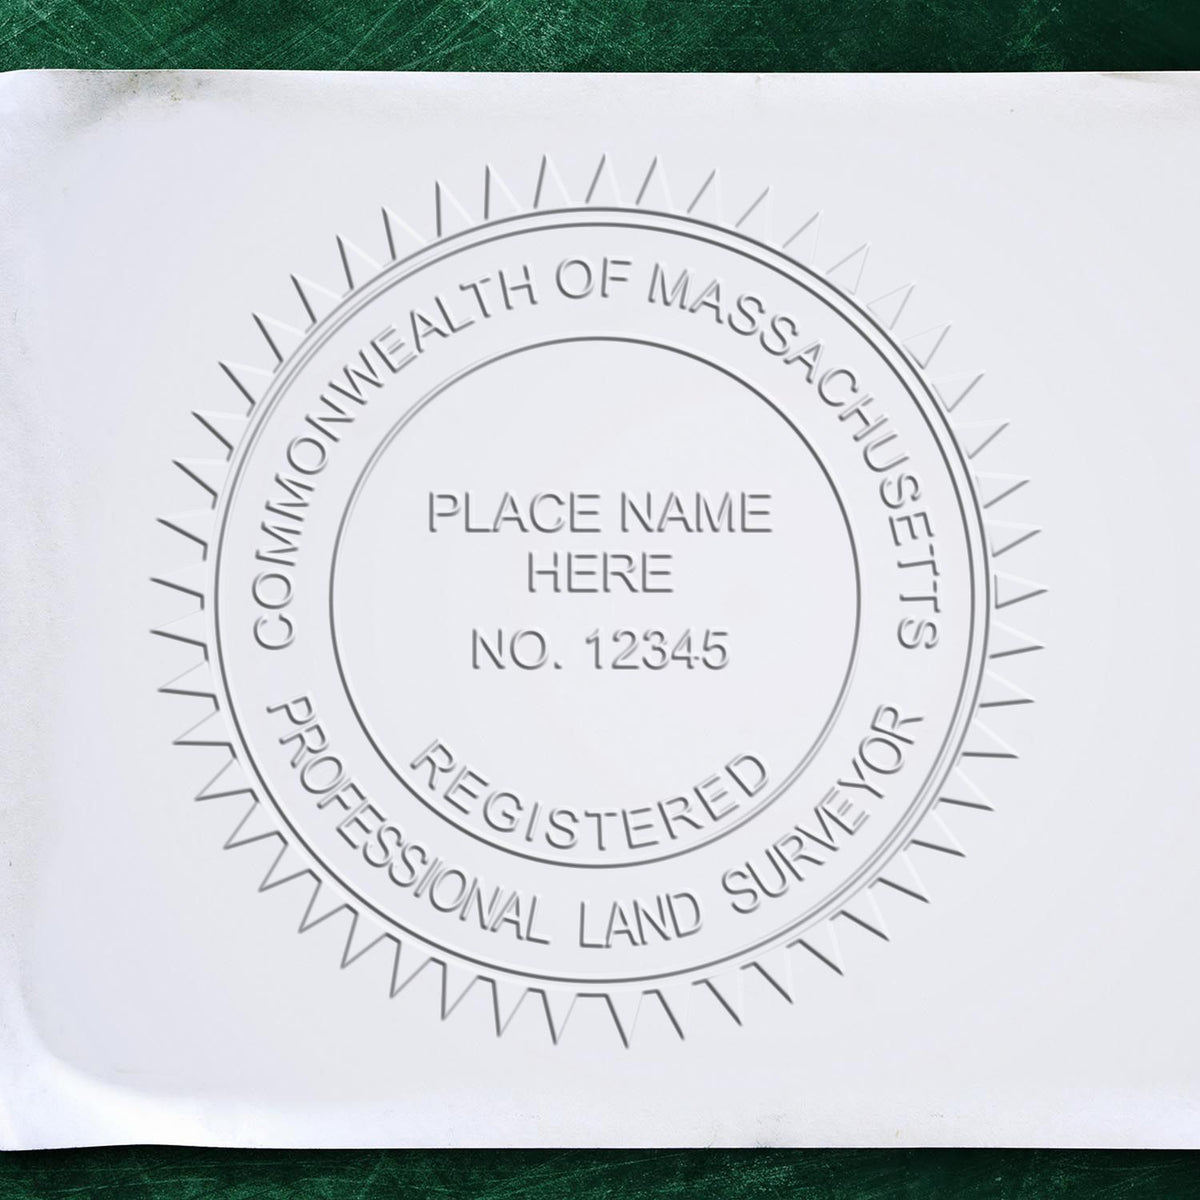 A stamped impression of the Long Reach Massachusetts Land Surveyor Seal in this stylish lifestyle photo, setting the tone for a unique and personalized product.